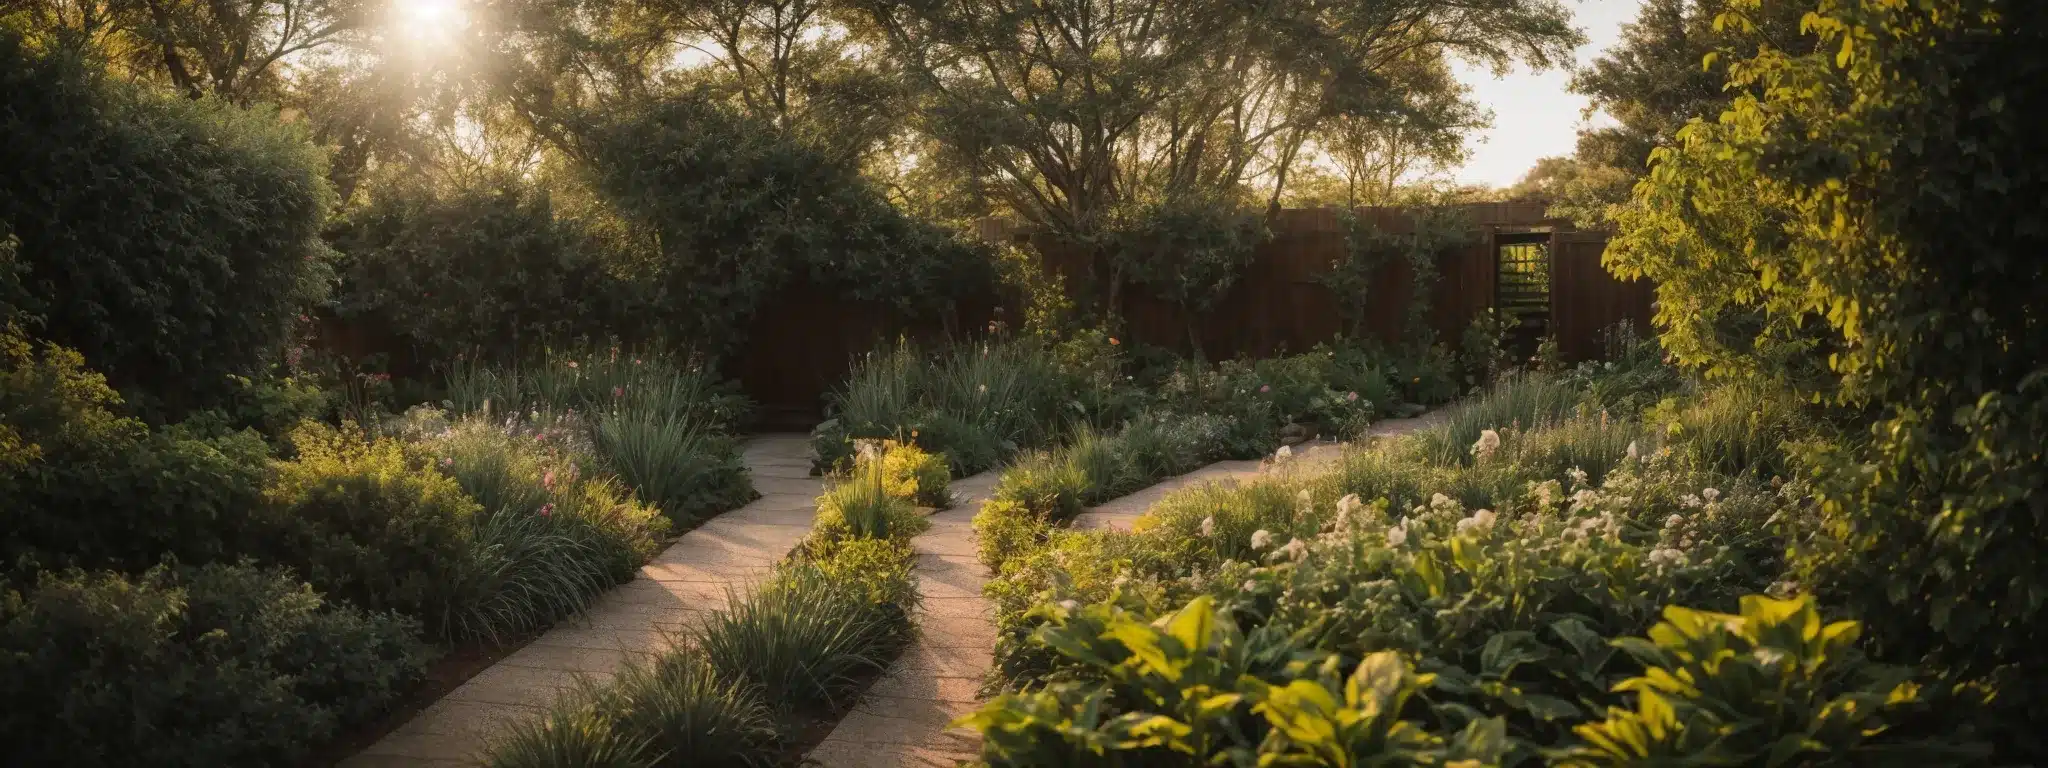 A Sunlit, Serene Garden With A Visible Clear Pathway Leading Out, Symbolizing The Ethical And Transparent Nature Of Sustainable Email Marketing.